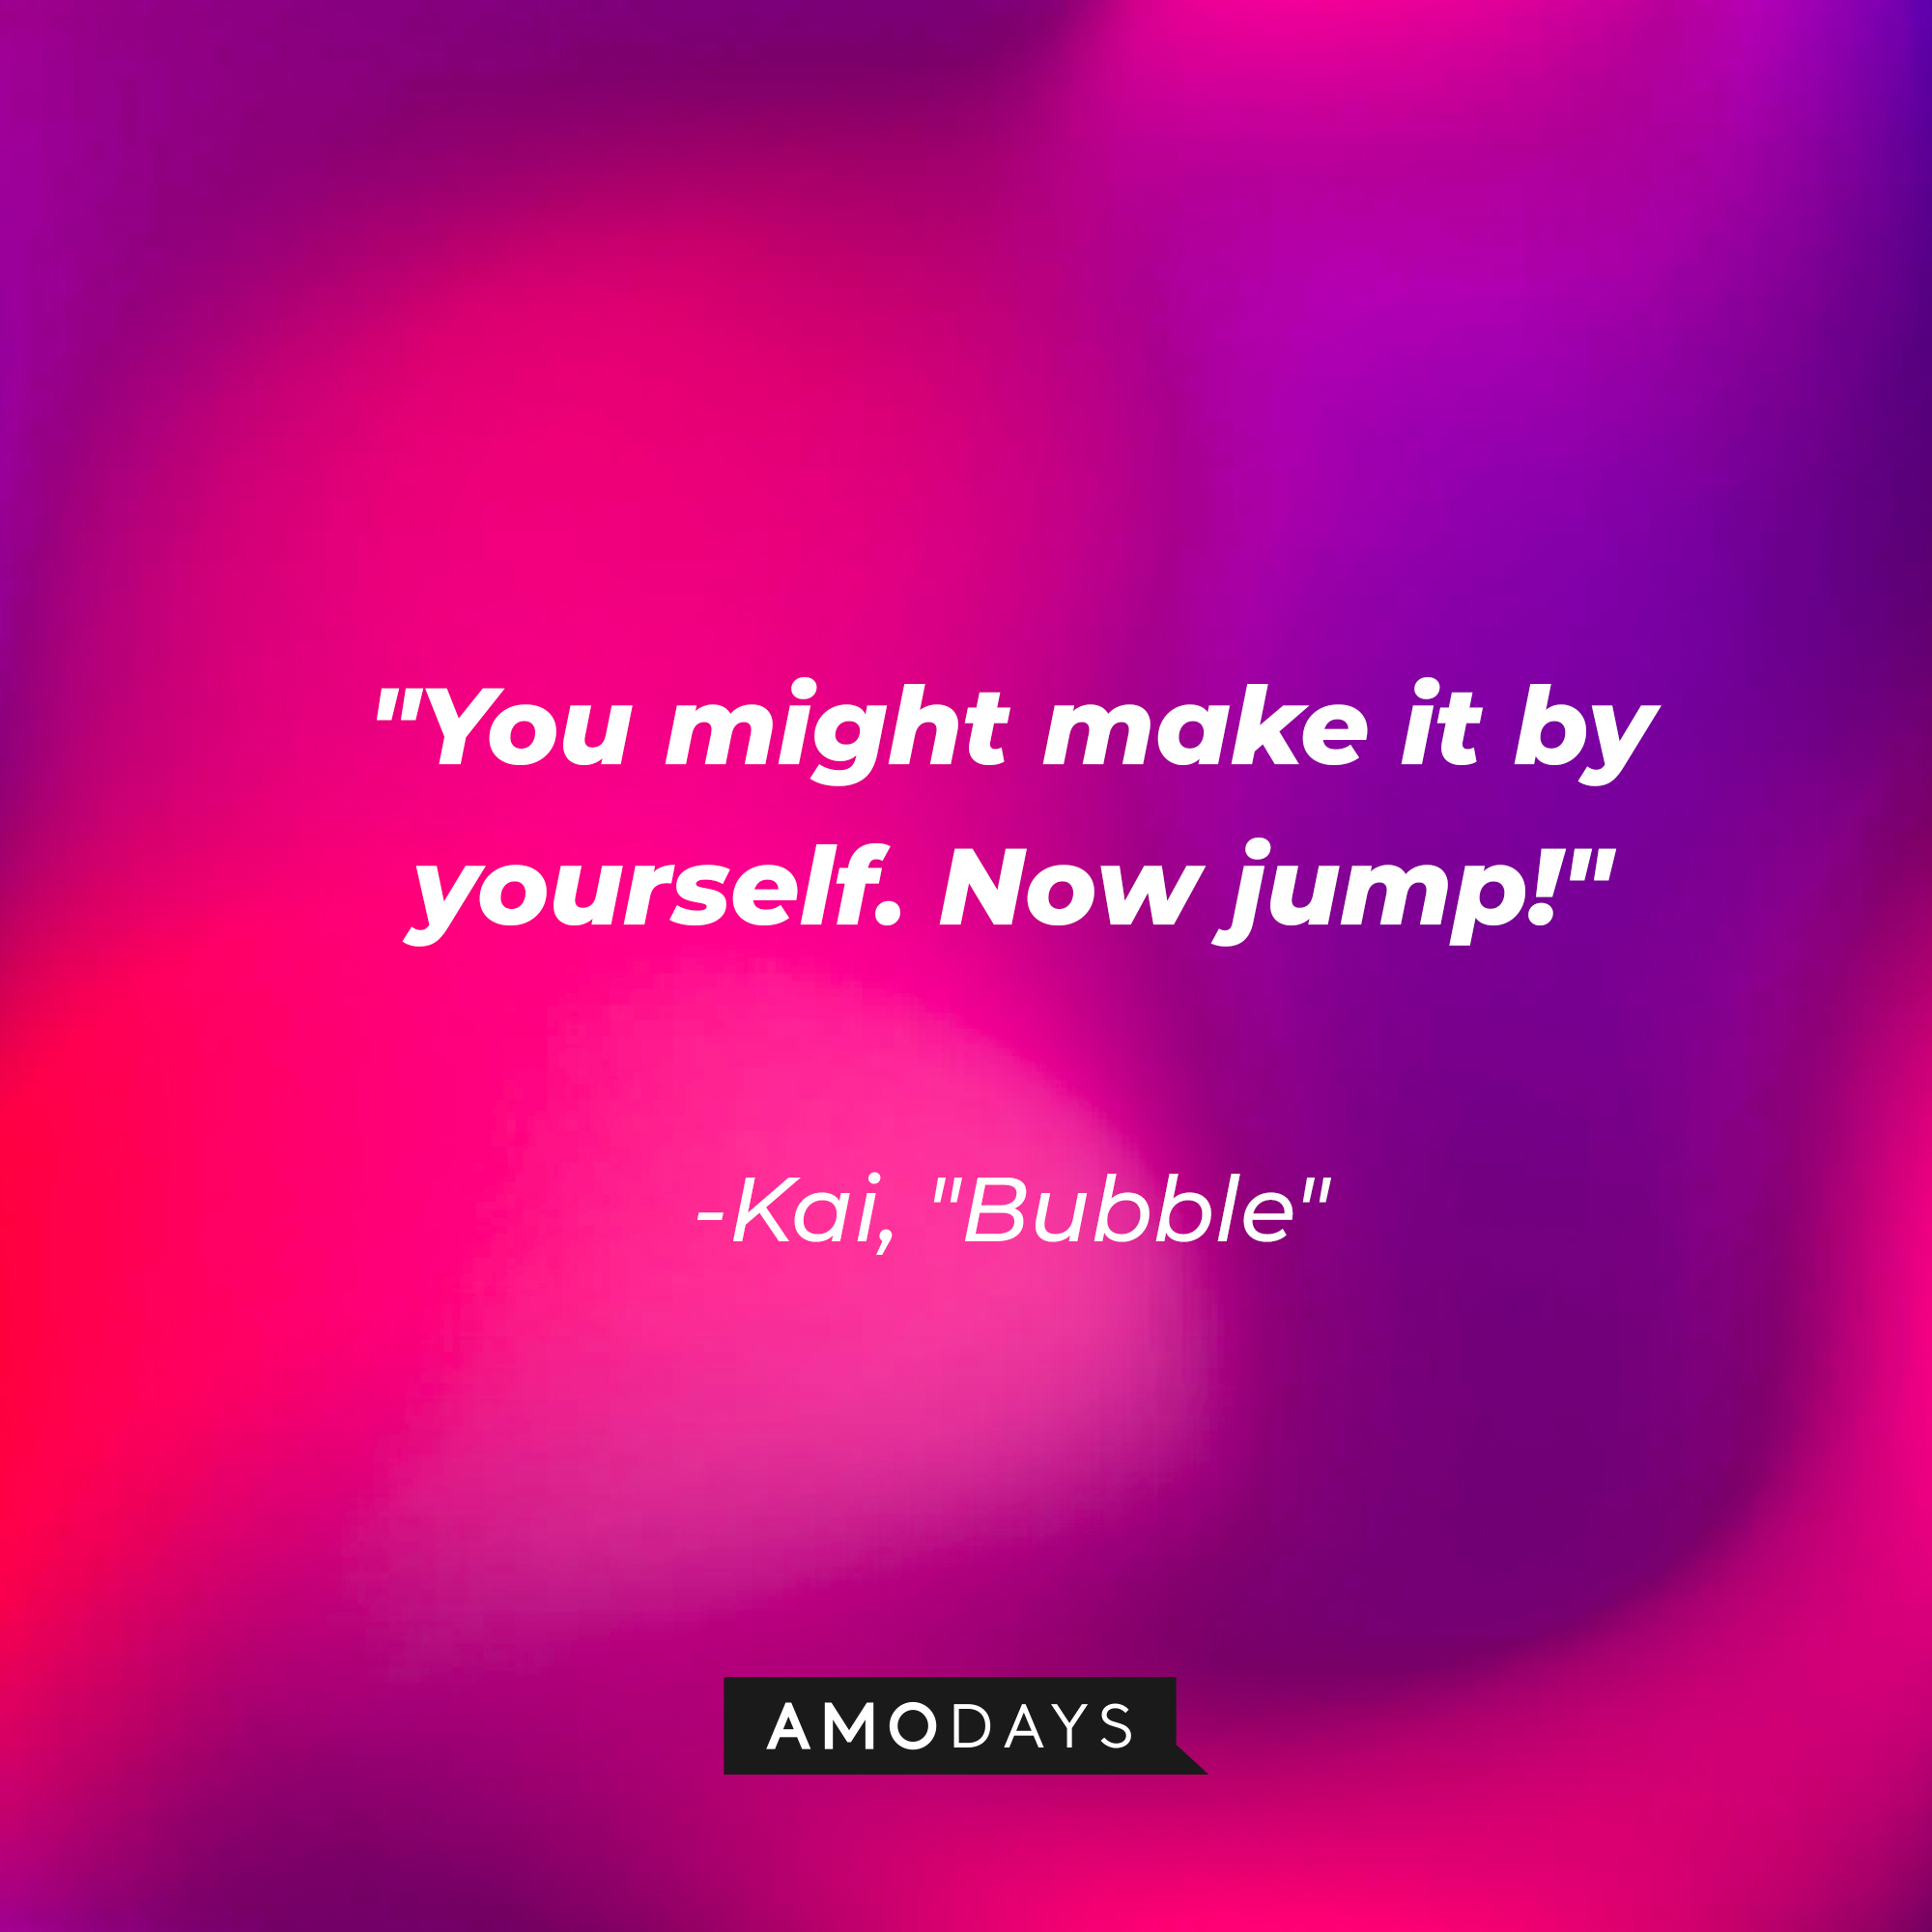 Usagi's quote on "Bubble:" "You might make it by yourself. Now jump!" | Source: AmoDays